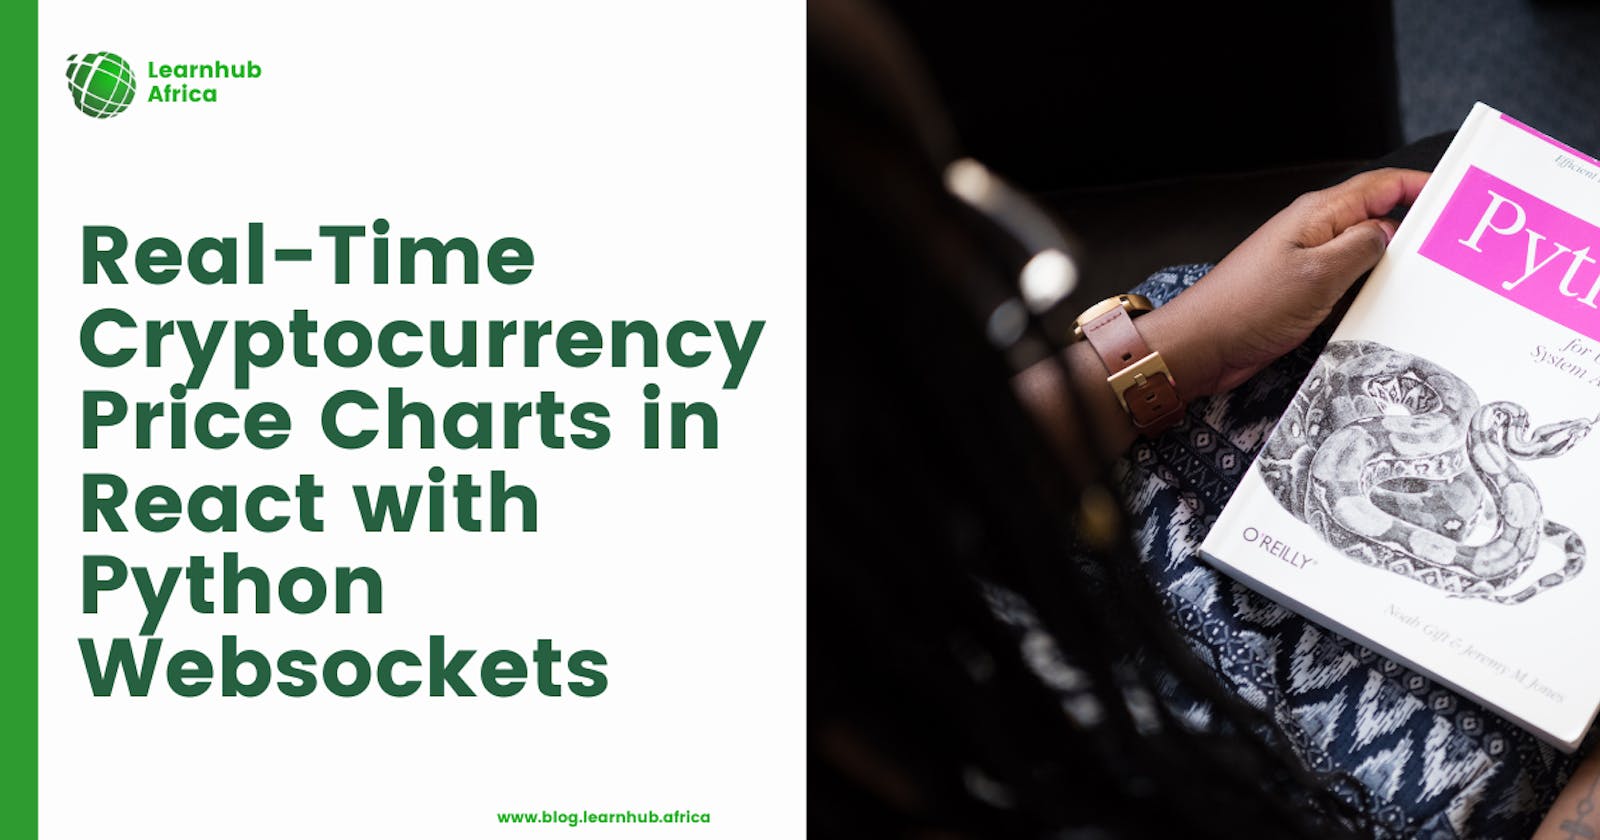 Real-Time Cryptocurrency Price Charts in React with Python Websockets